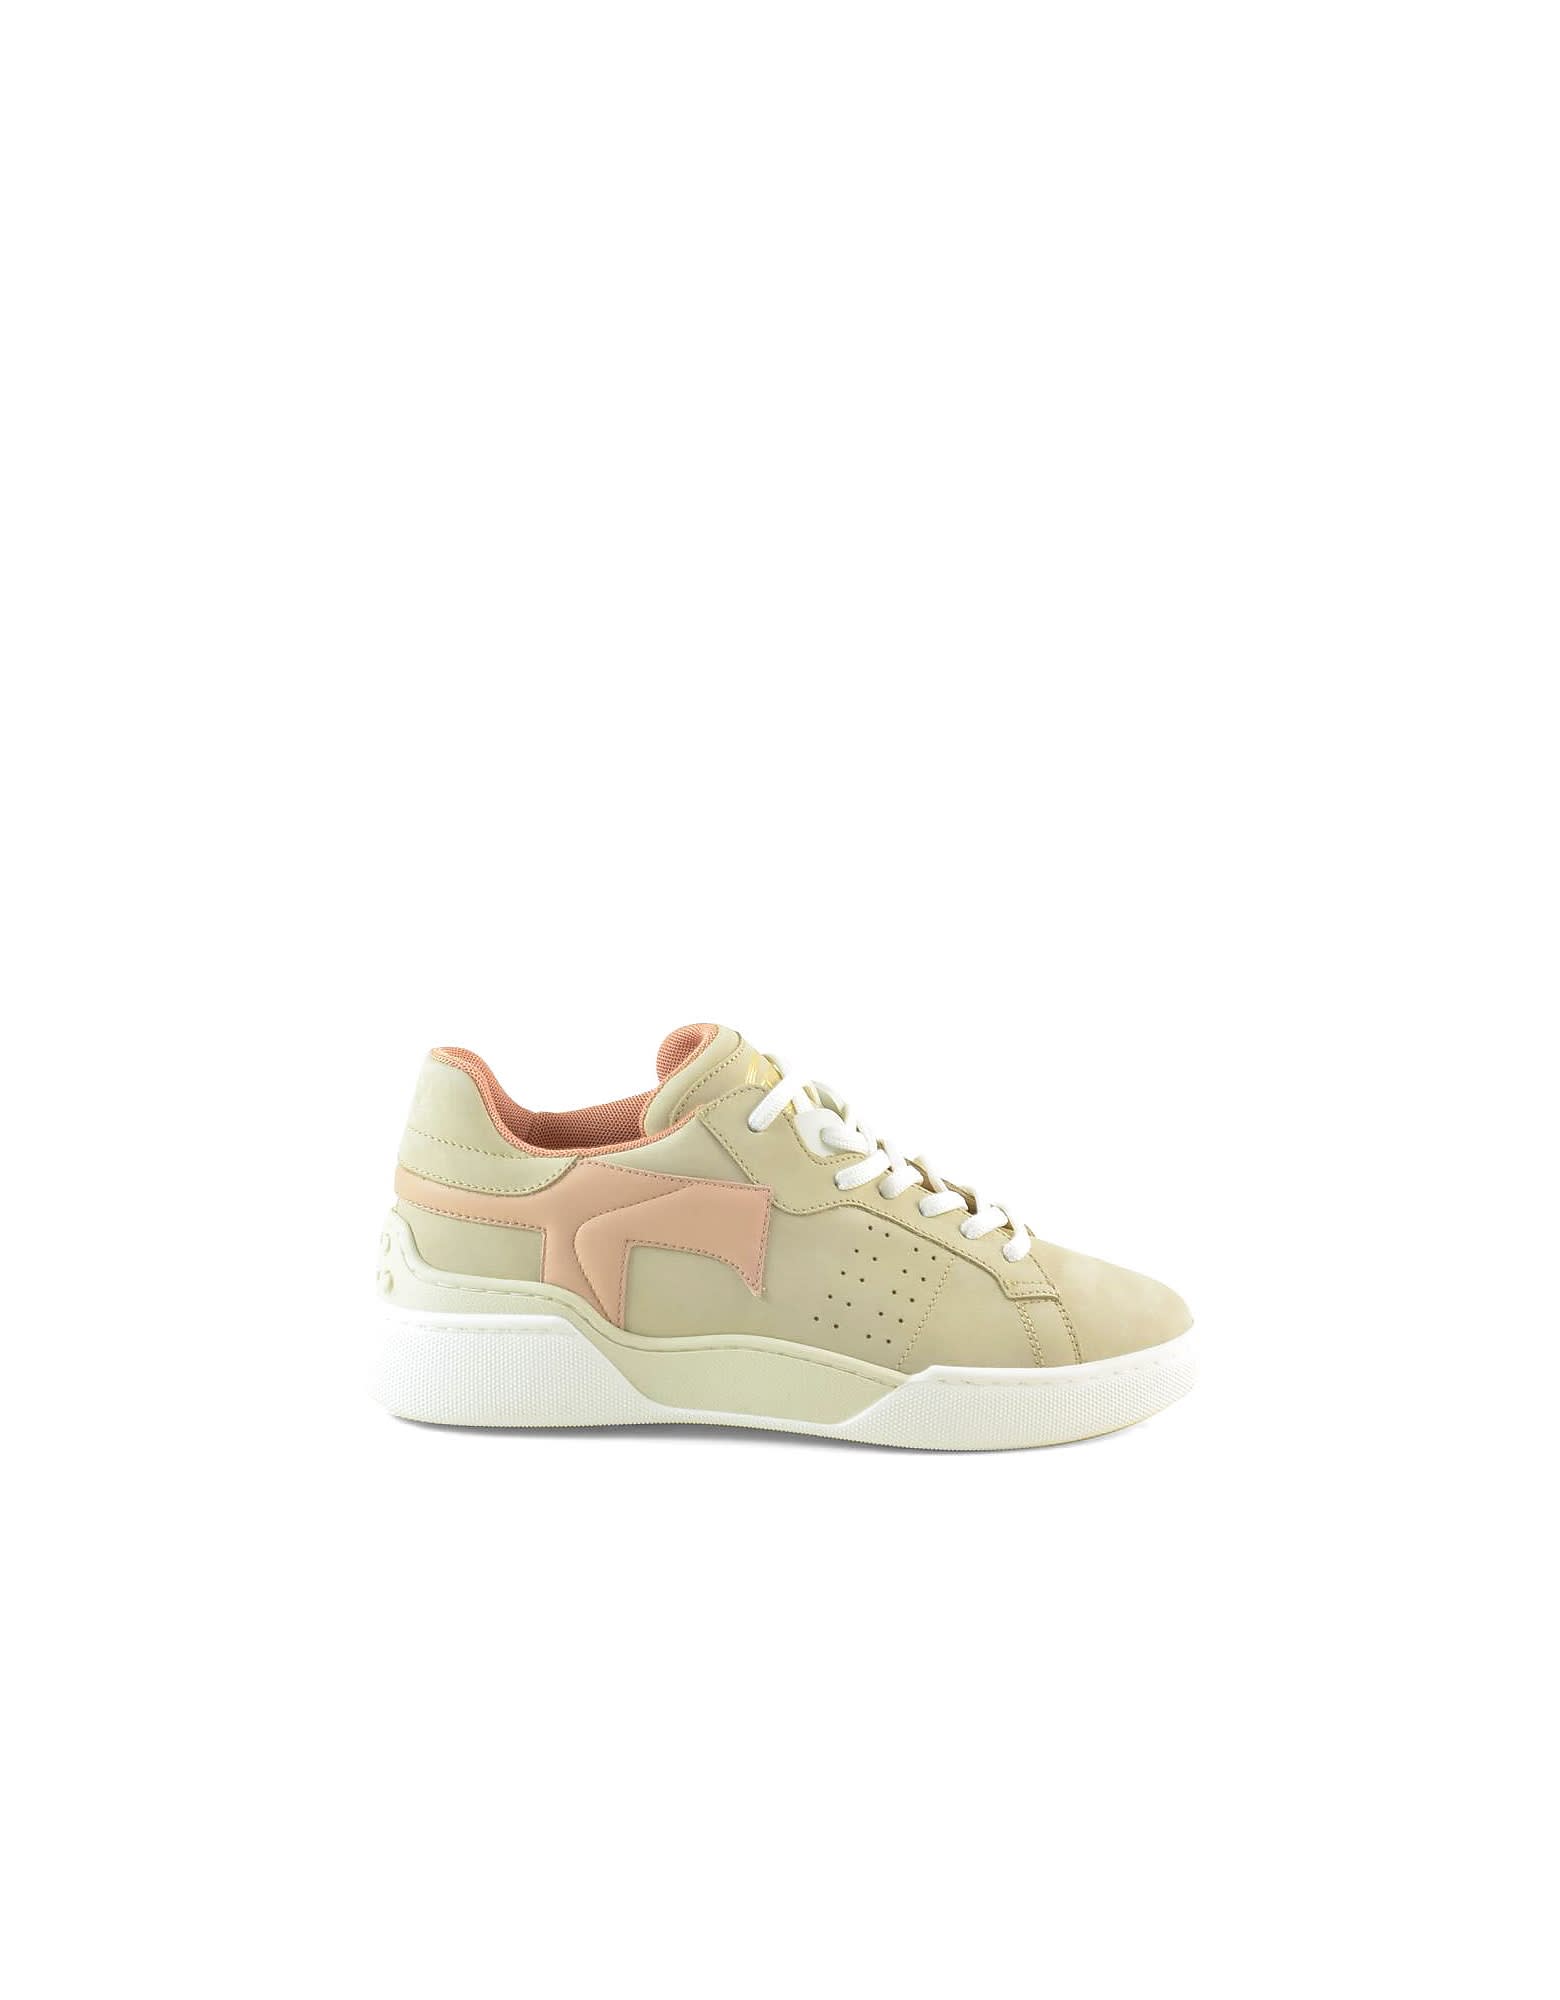 Tods Pink Leather Sneakers